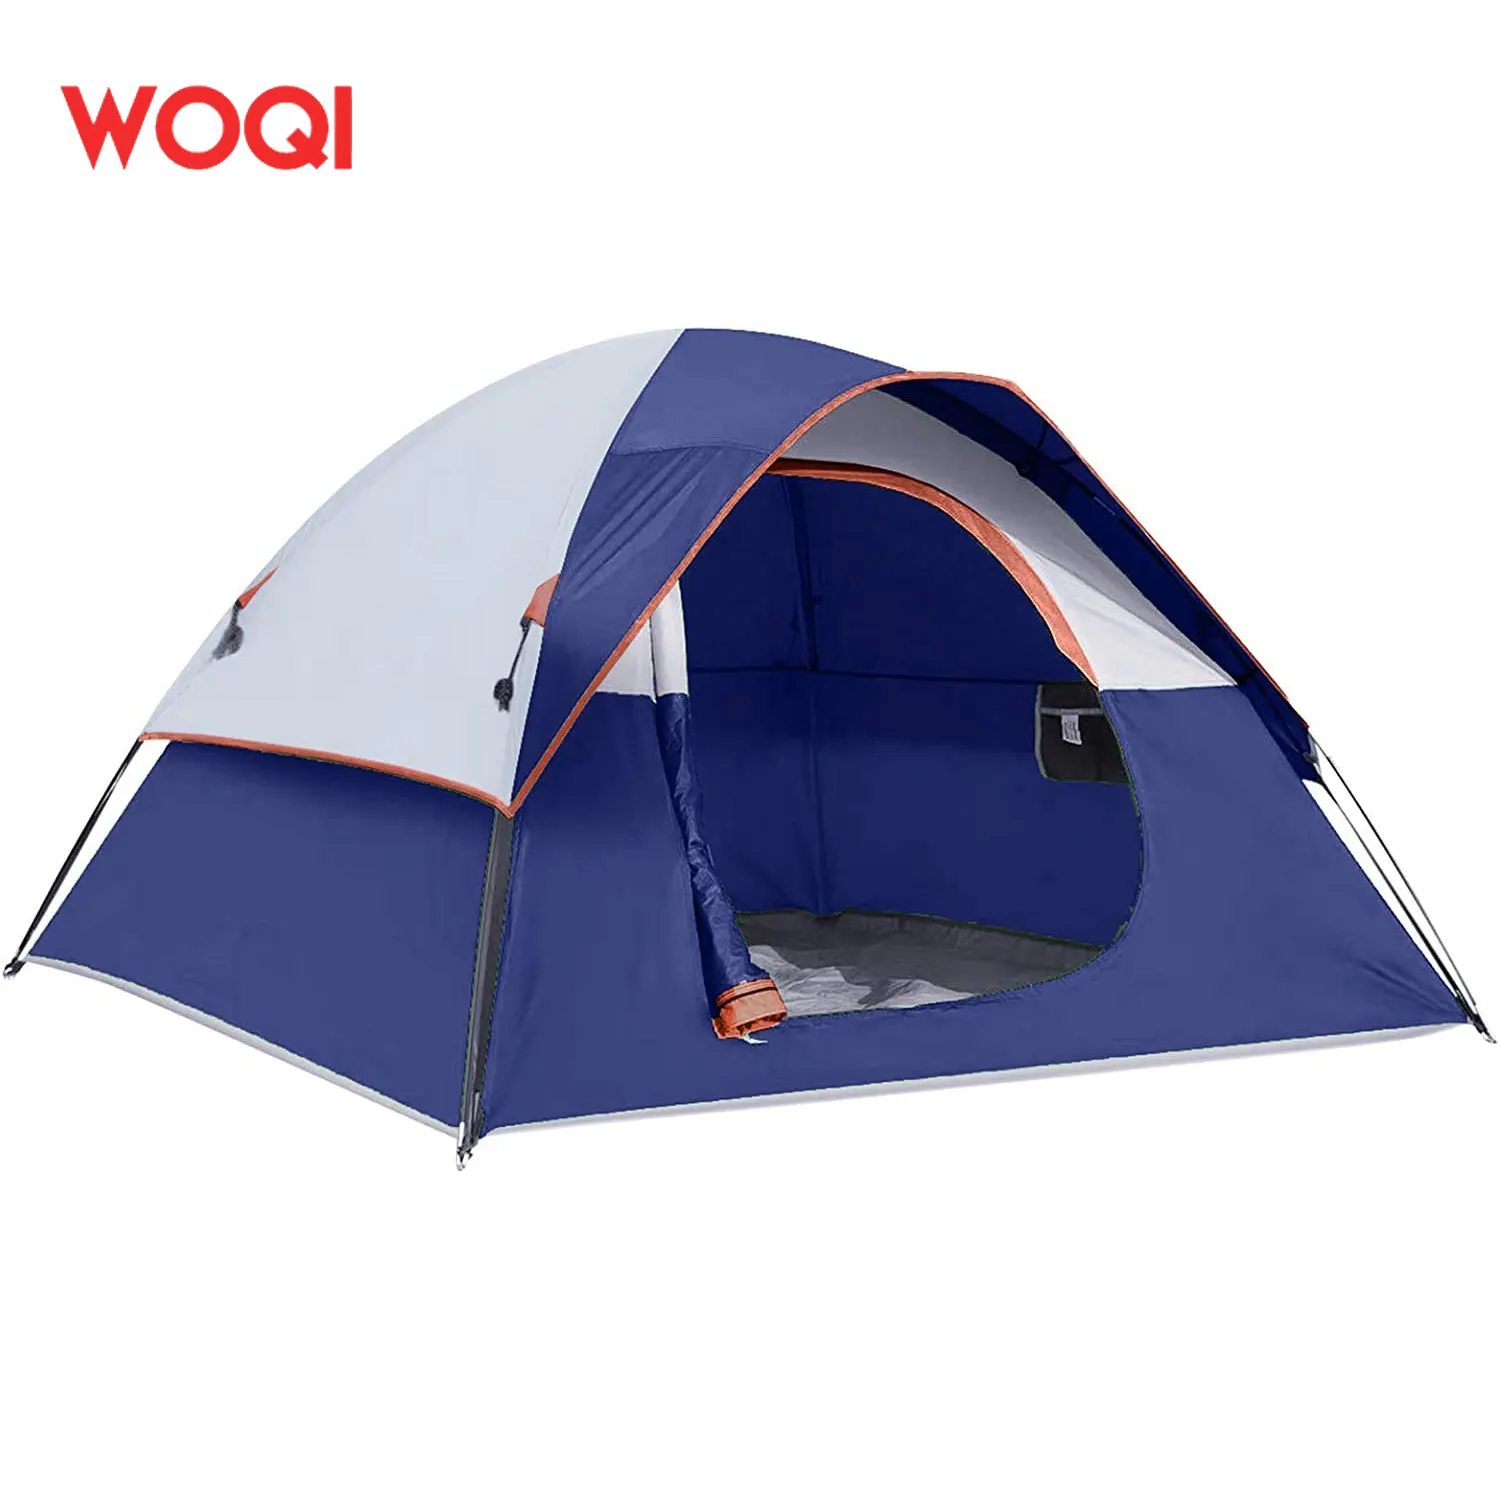 WOQI Factory Price Hot sale Outdoor Waterproof Windproof inflatable tent for camping glamping